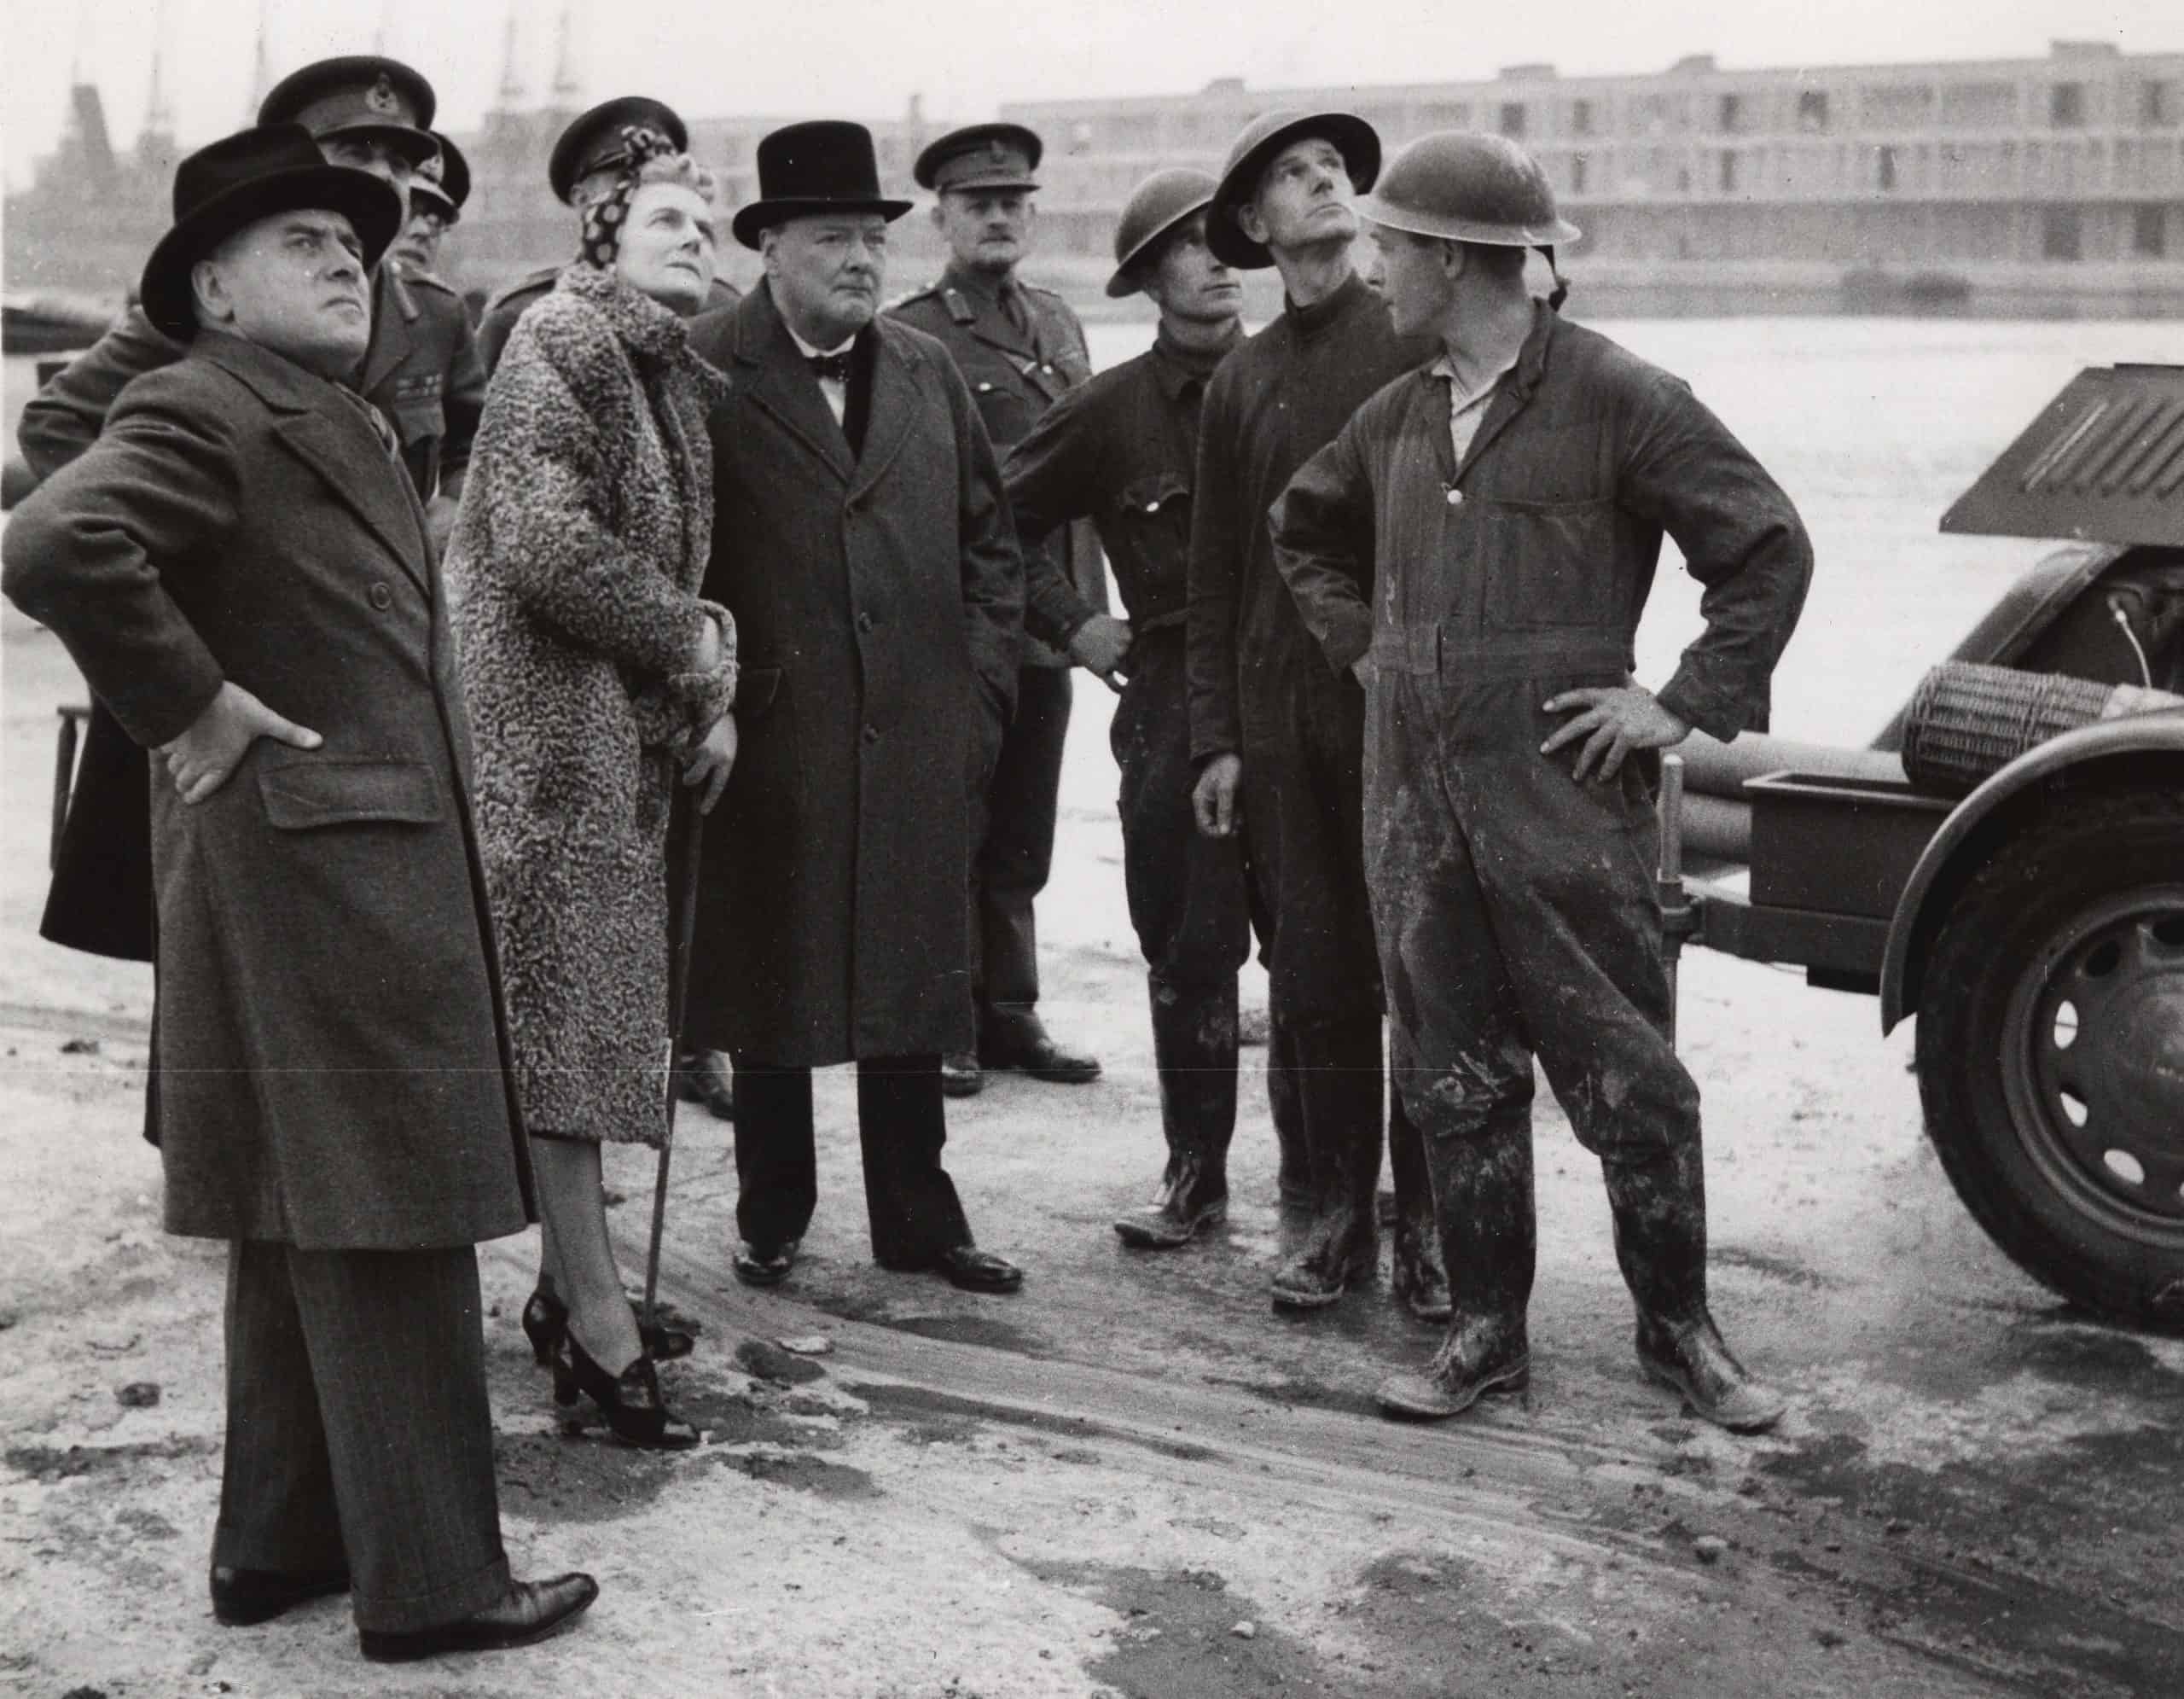 The Prime Minister and Mrs Churchill, with the Flag Officer, London, and J Douglas Ritchie (on left), touring London's dock in Sept 1940, seen with a group of auxiliary firemen